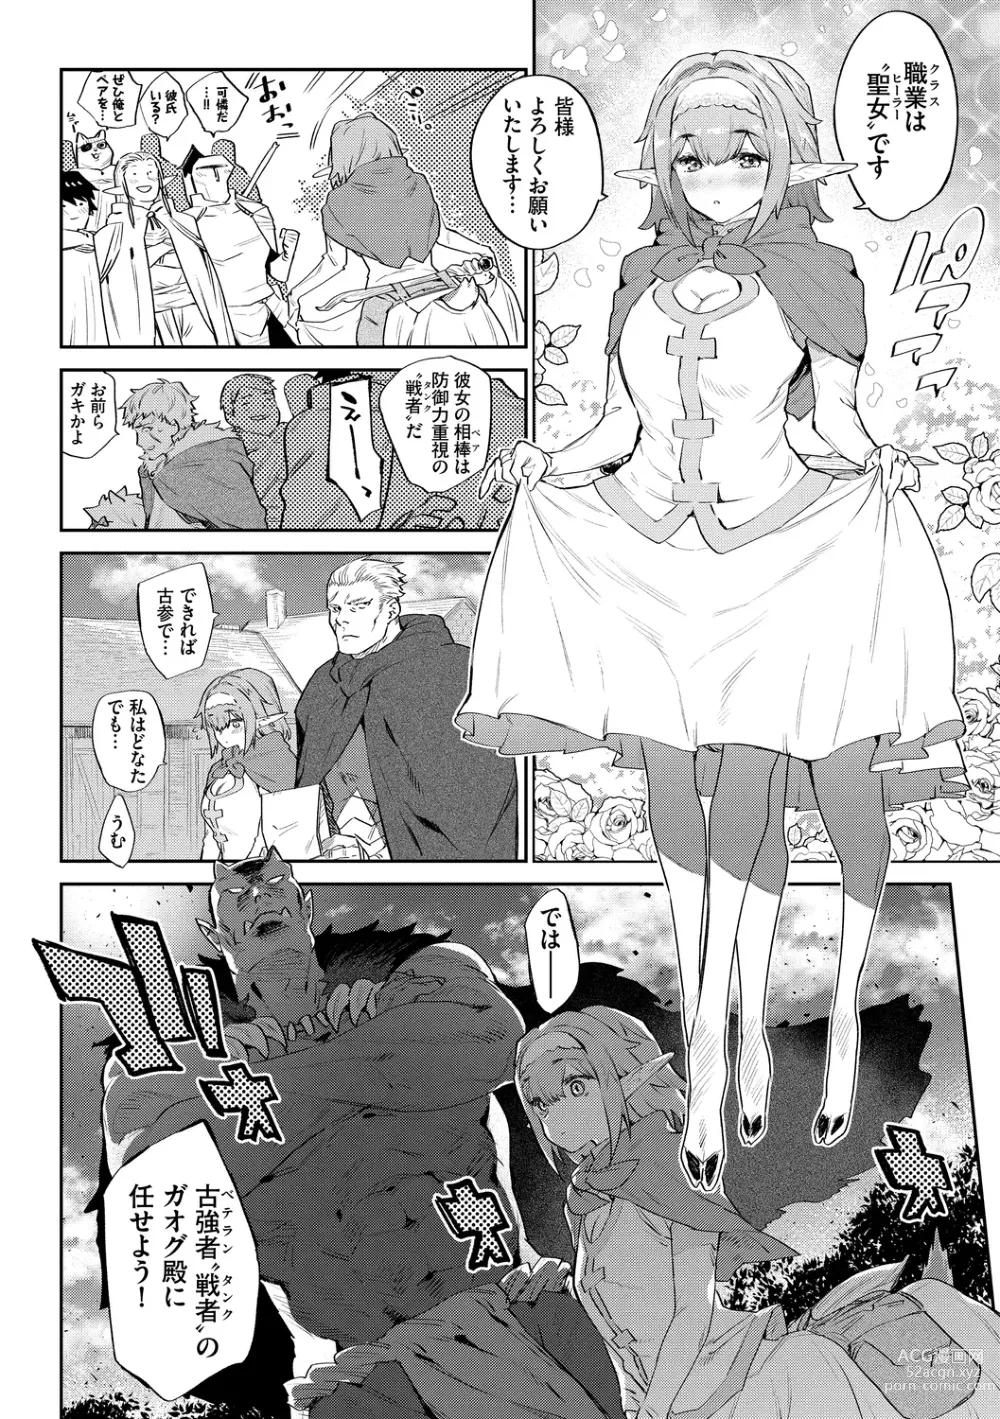 Page 4 of manga Ihou no Otome - Monster Girls in Another World